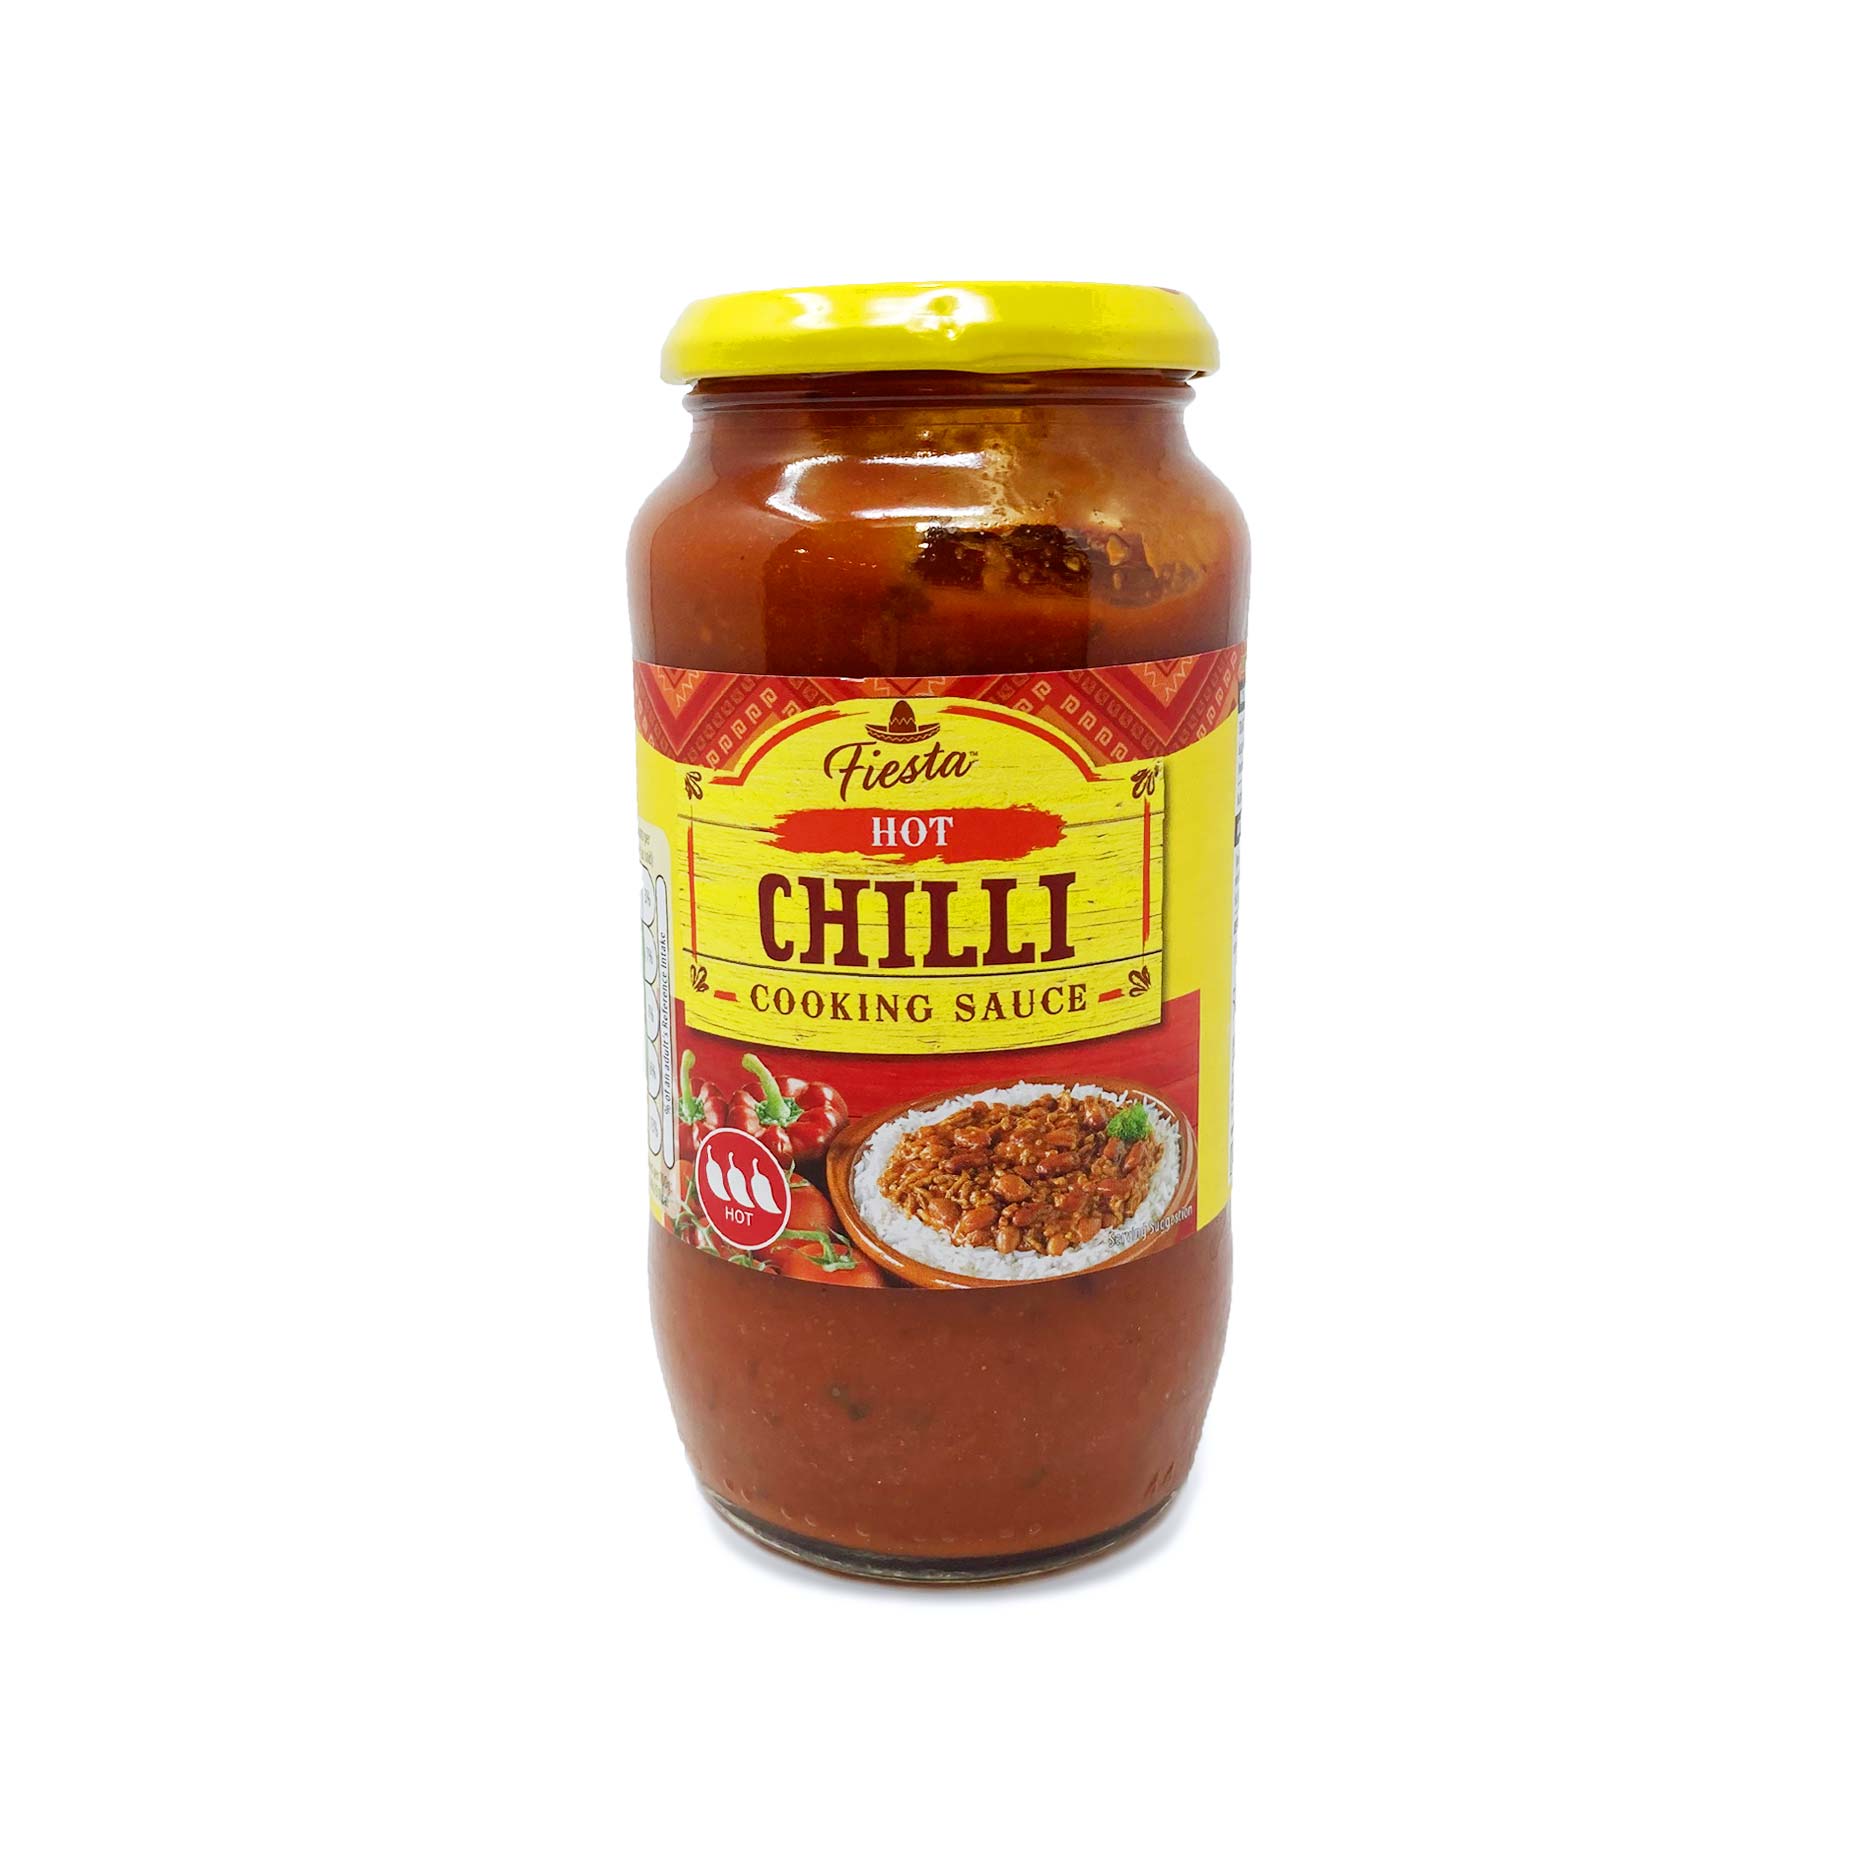 Fiesta Hot Chilli Con Carne Cooking Sauce 500g (2pack)